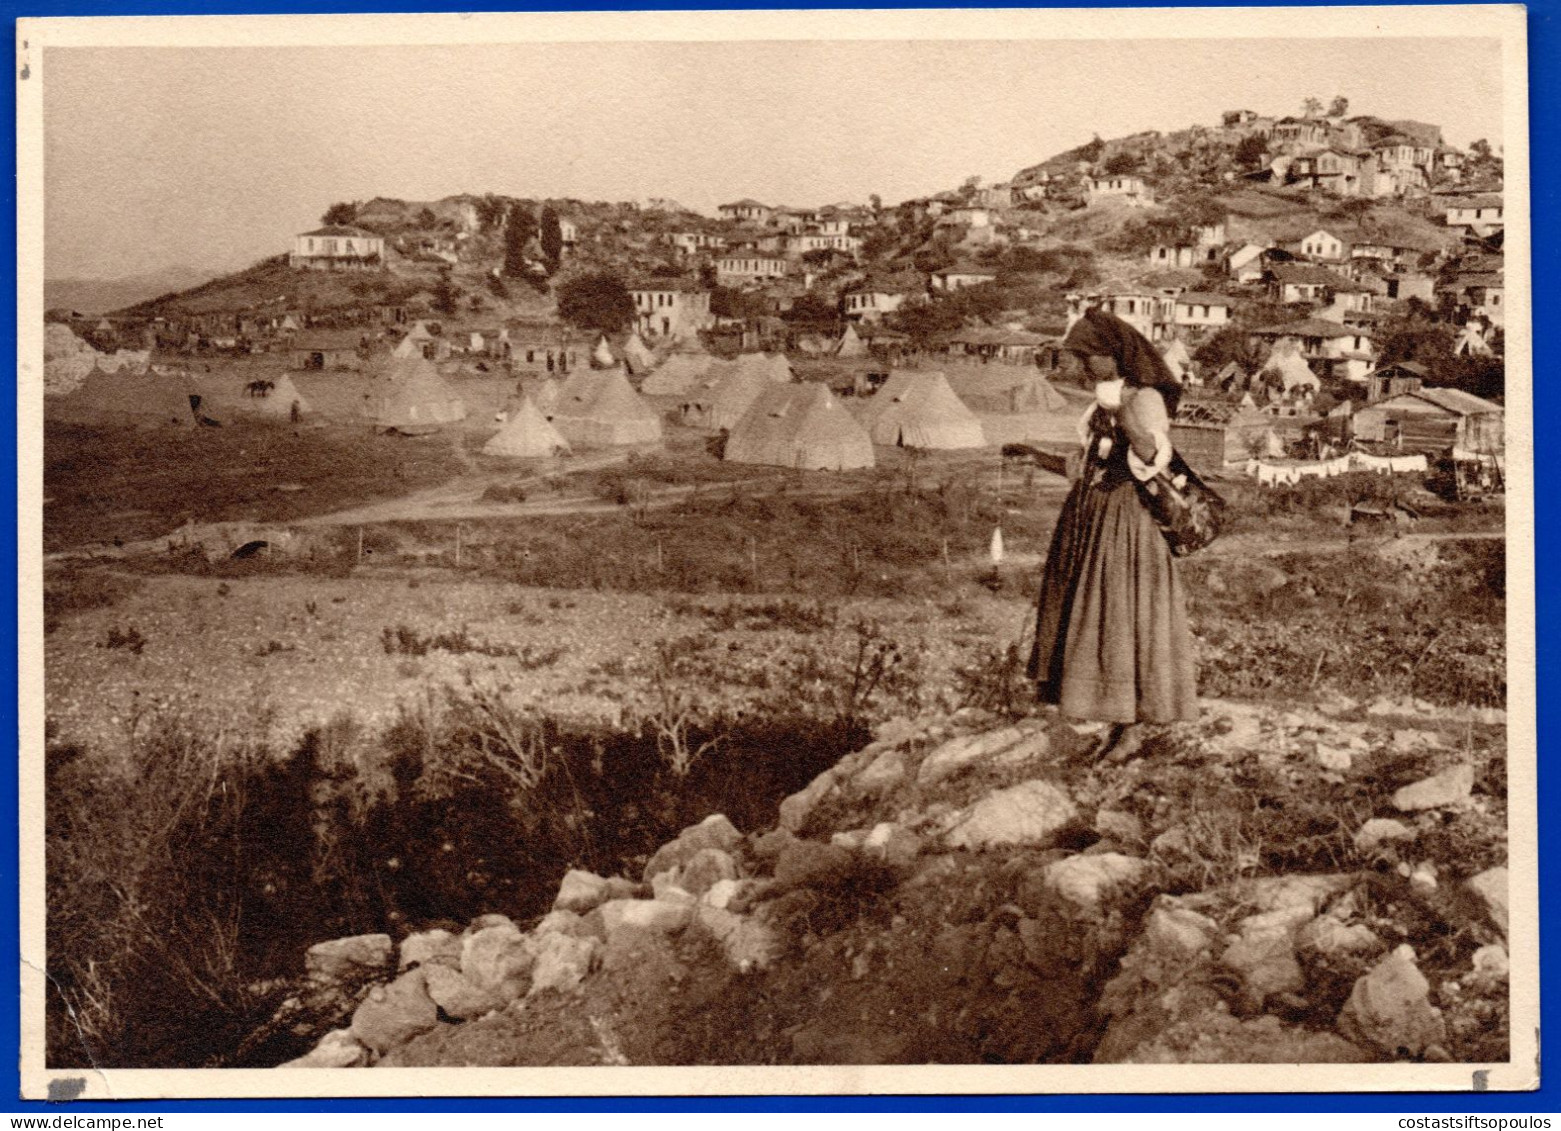 3025.GREECE. UNIDENTIFIED PLACE/VILLAGE POSSIBLY IN MACEDONIA, PHOTO 17.5 X 12.5 Cm.LIGHT CREASE LOWER LEFT. - Europa